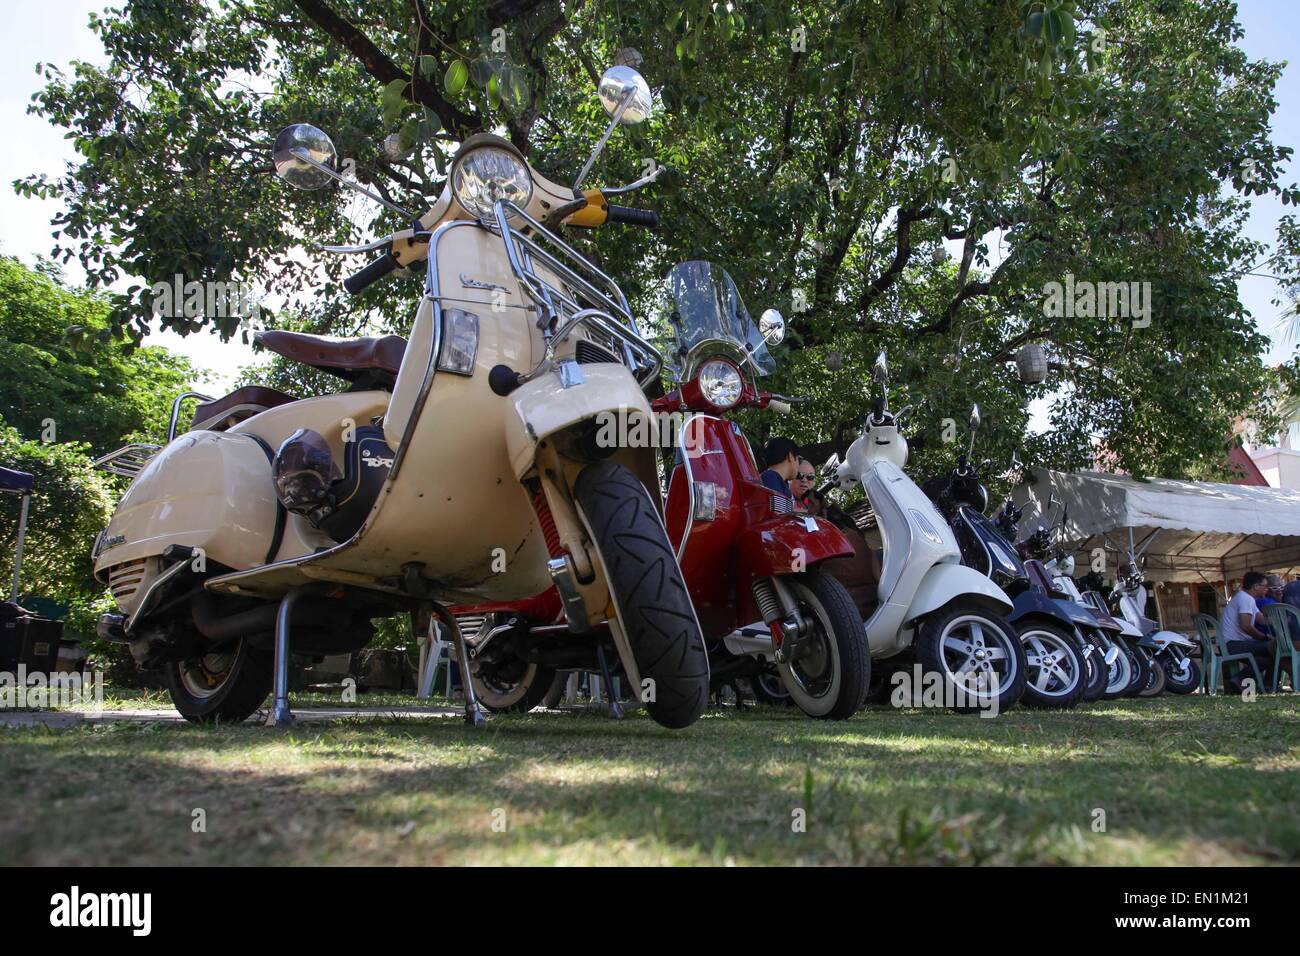 Metro Manila, Philippines. 25th Apr, 2015. European scooters are lined up during the 9th Scooter Jamboree in Angono, Rizal on Saturday, the Art Capital of the Philippines annually hosts the Scooter Jamboree, a gathering of European scooter enthusiasts in Metro Manila. © Mark Cristino/Pacific Press/Alamy Live News Stock Photo